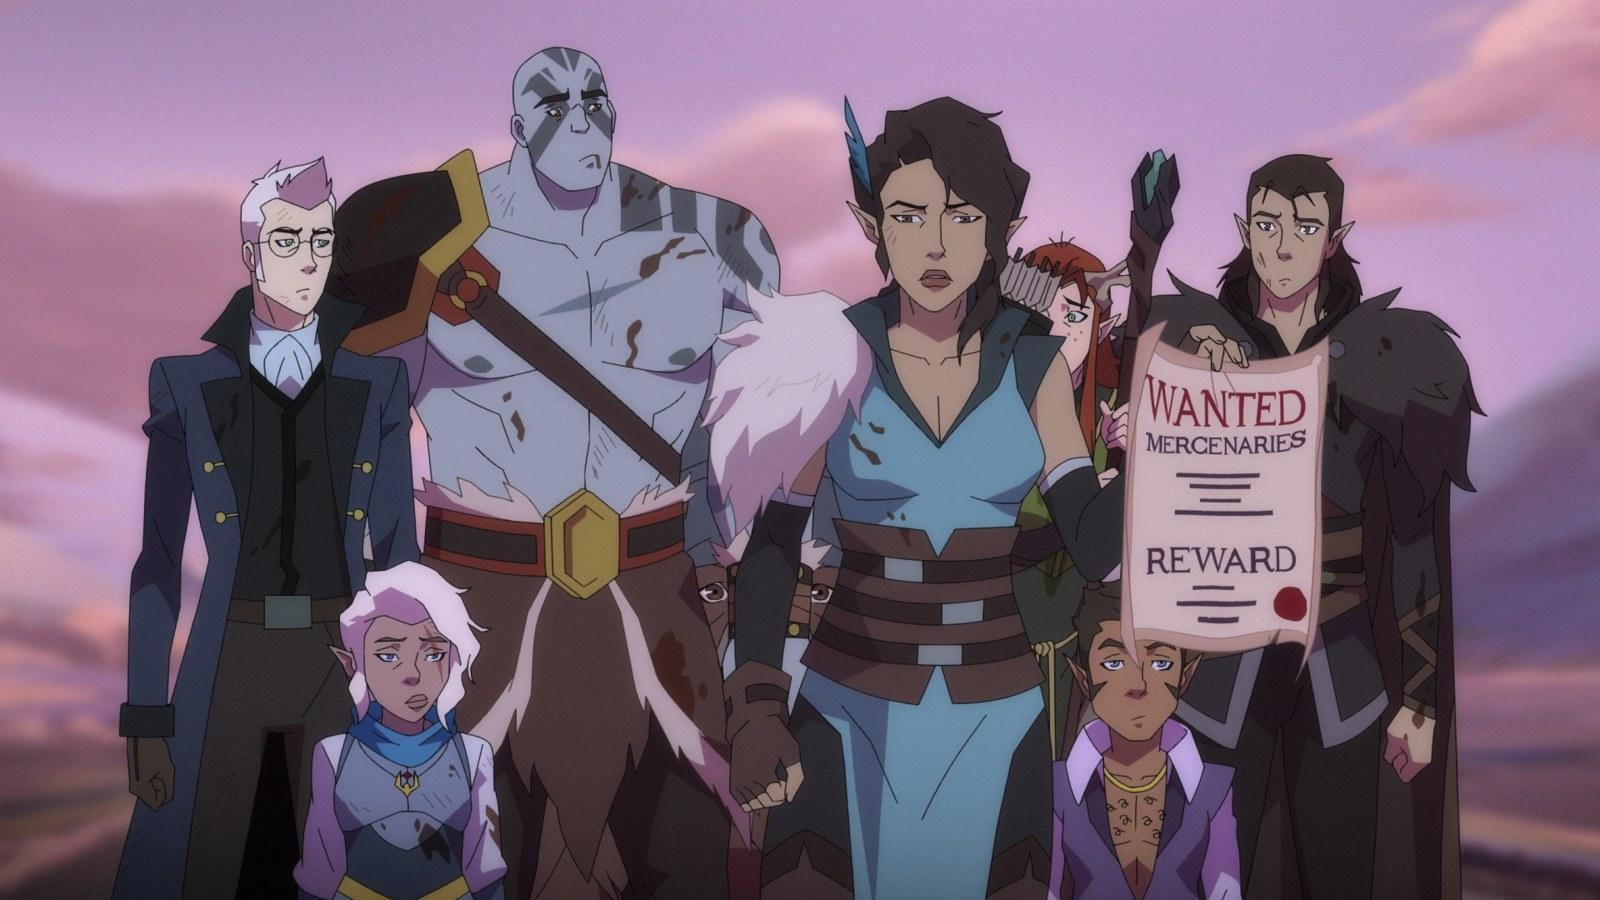 Will there be a Season 3 of The Legend of Vox Machina?